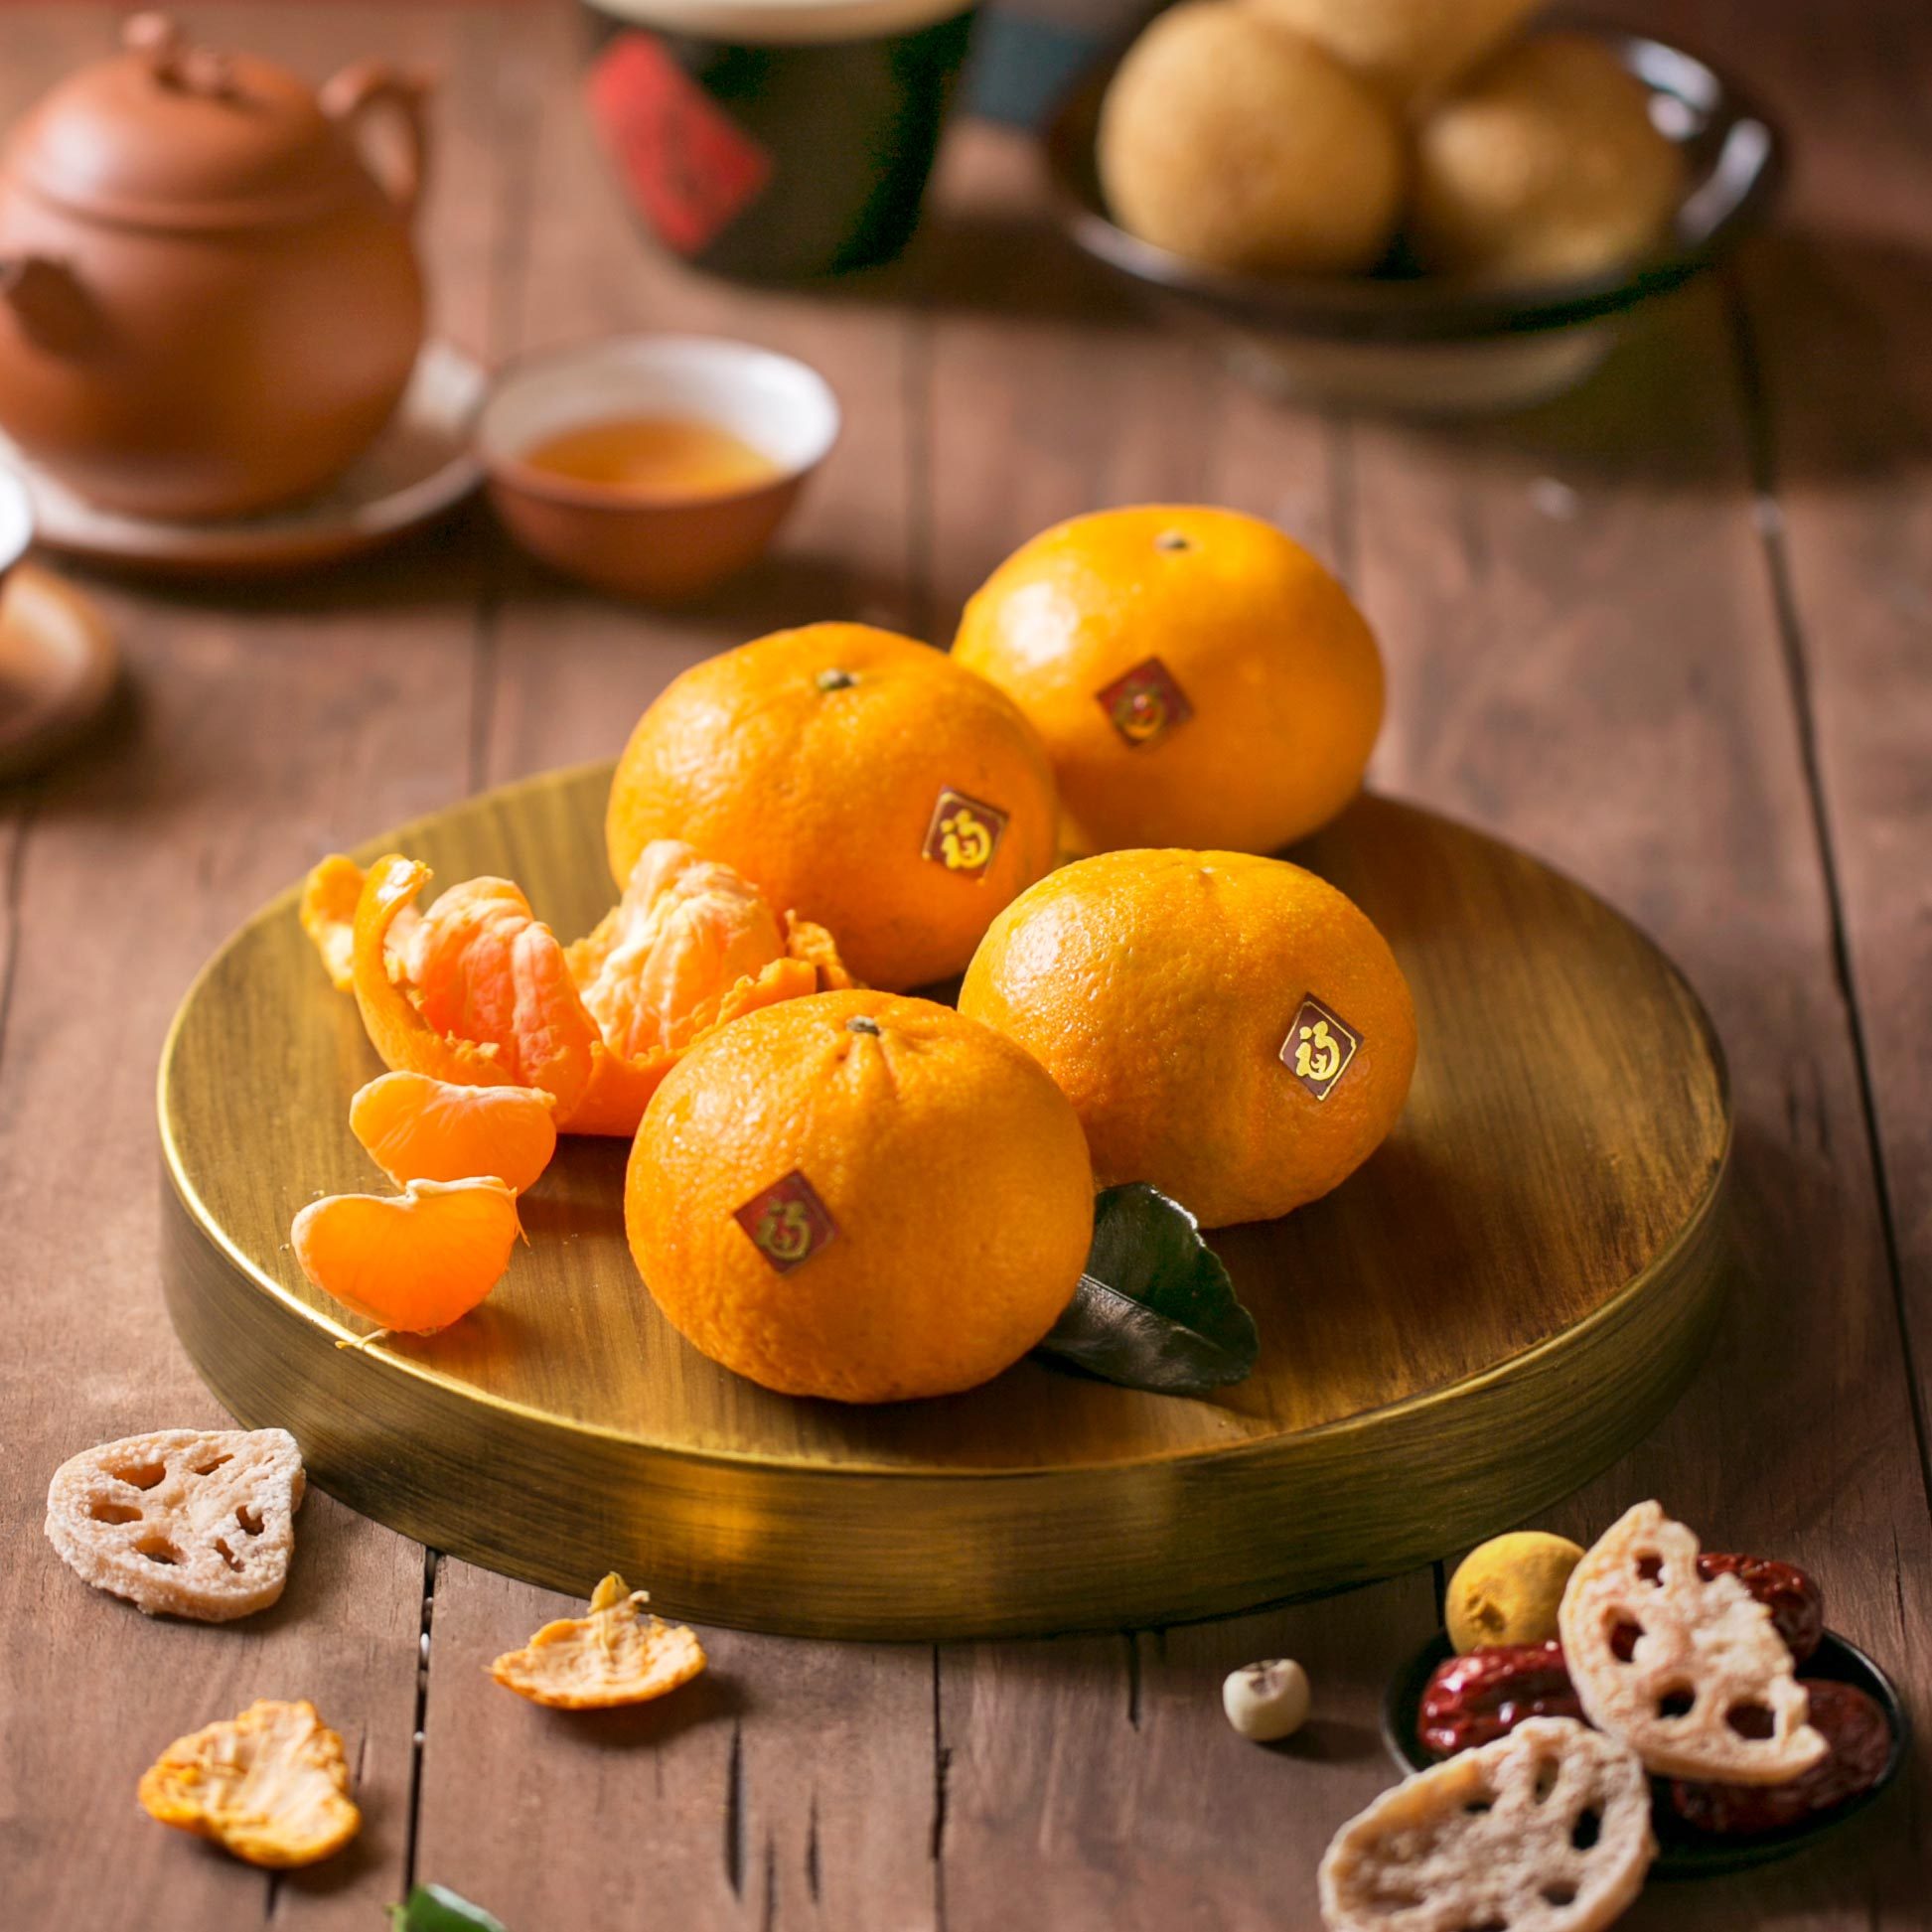 oranges for good luck on chinese new year